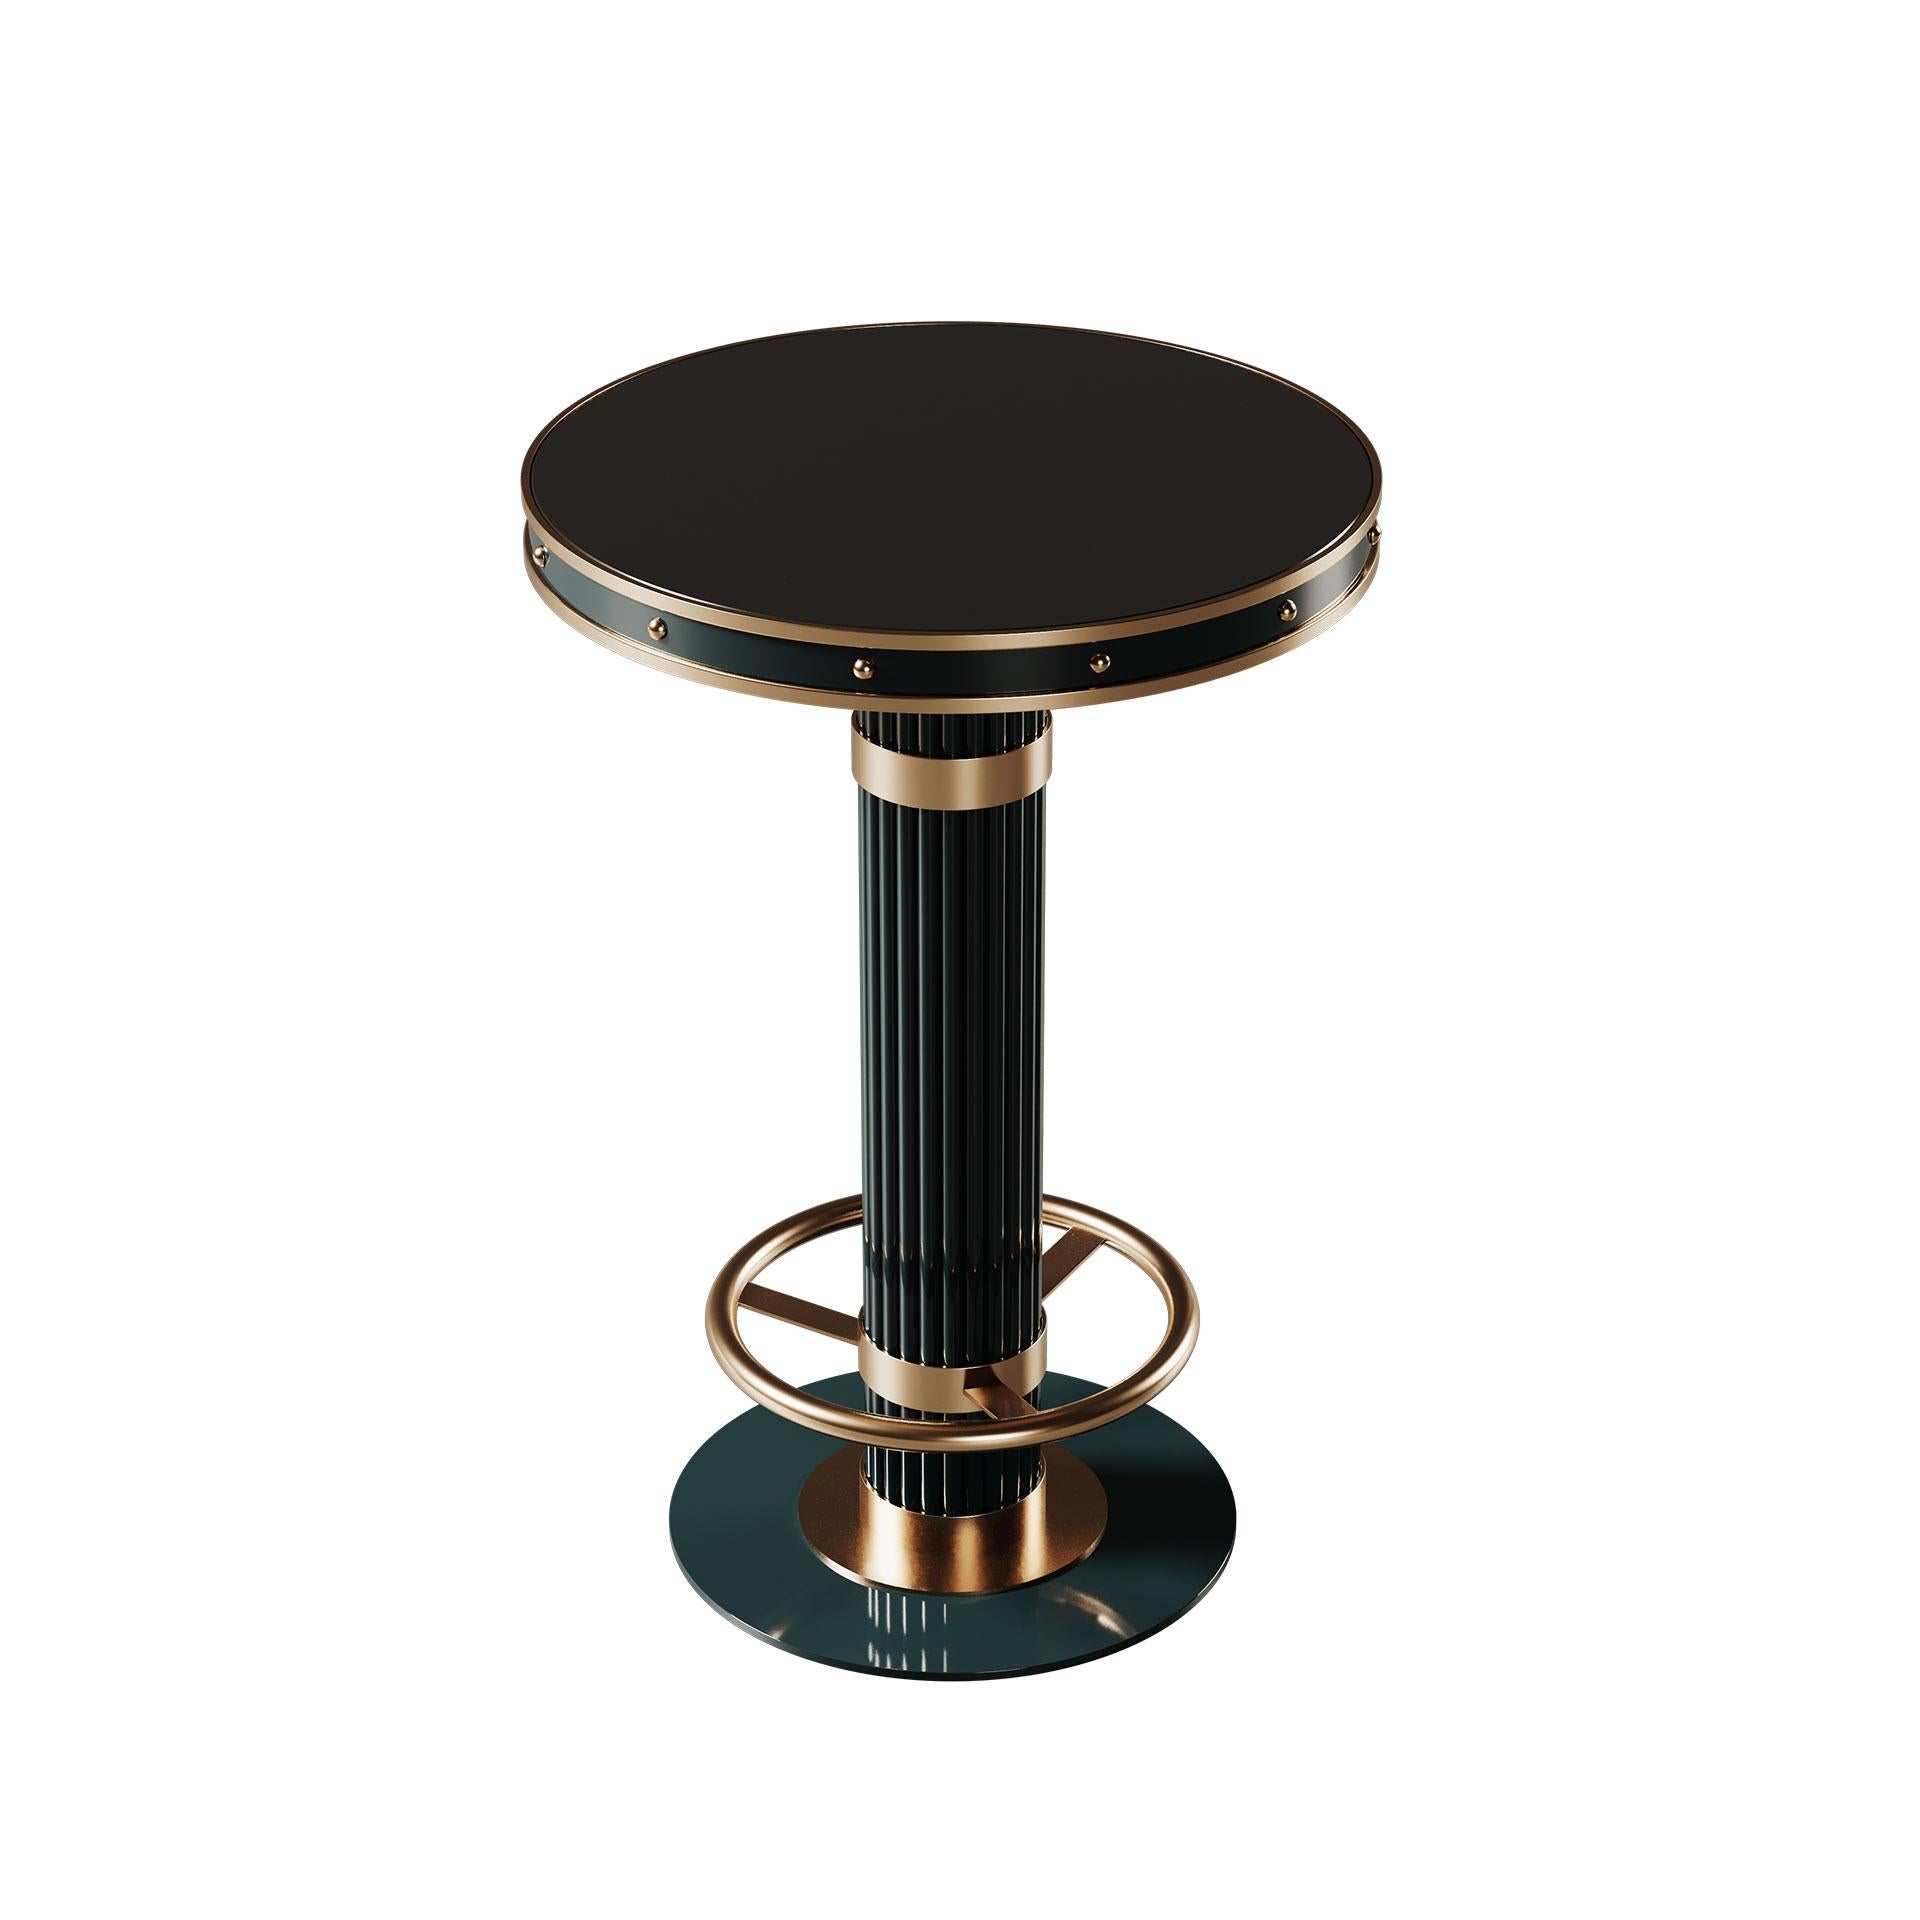 Structured in lacquered metal, and featuring a lacquered glass tabletop and brushed brass details, which highlights its sophisticated contemporary design. Picking out a bar table that fits well with your project decor elevates the entire setting,